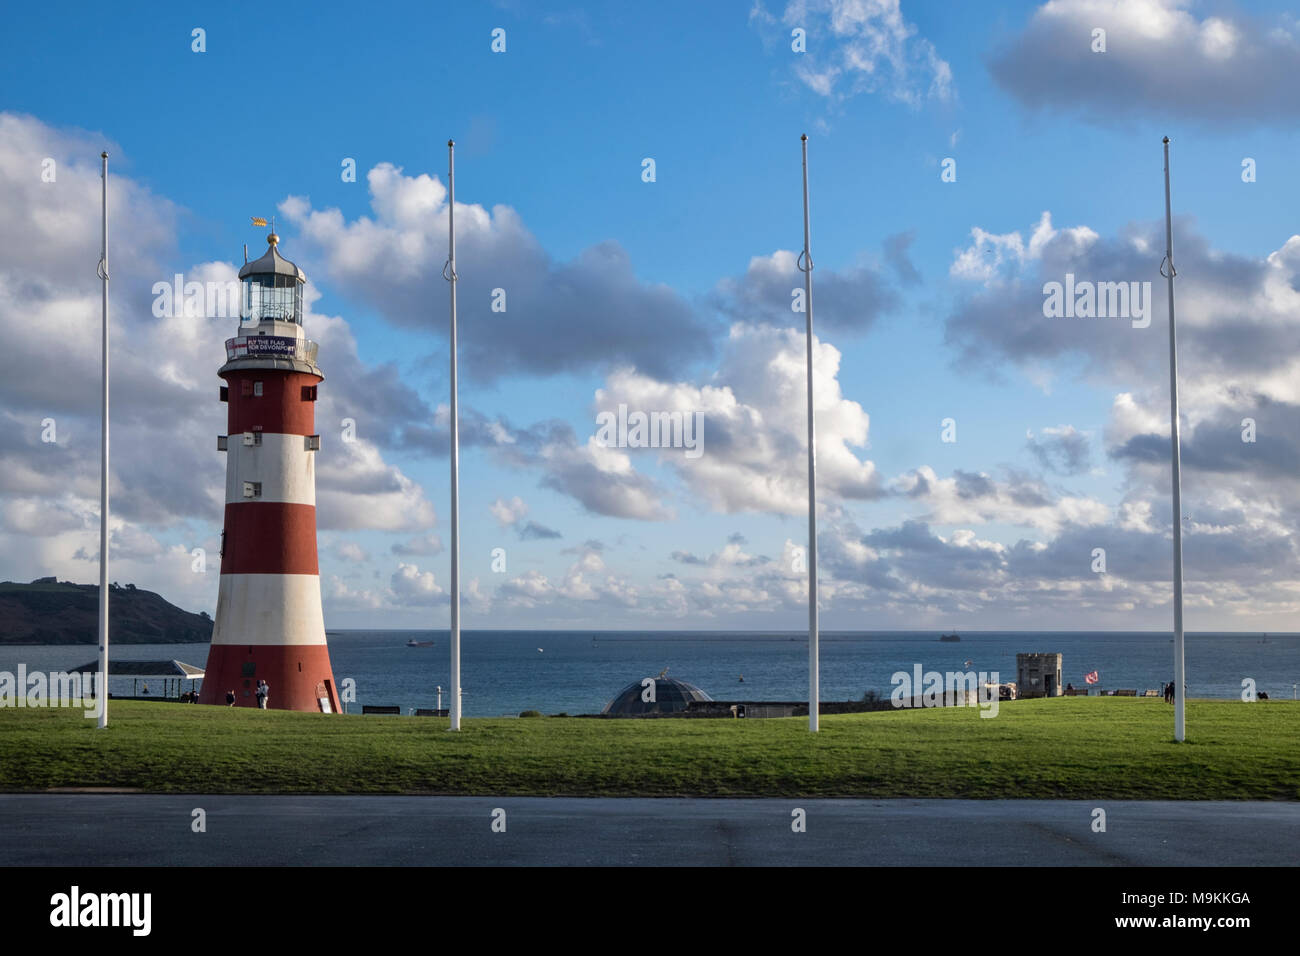 Smeaton's Tower Eddystone lighthouse on the Hoe in Plymouth, Devon,UK,  overlooking the sea on a bright day. Stock Photo